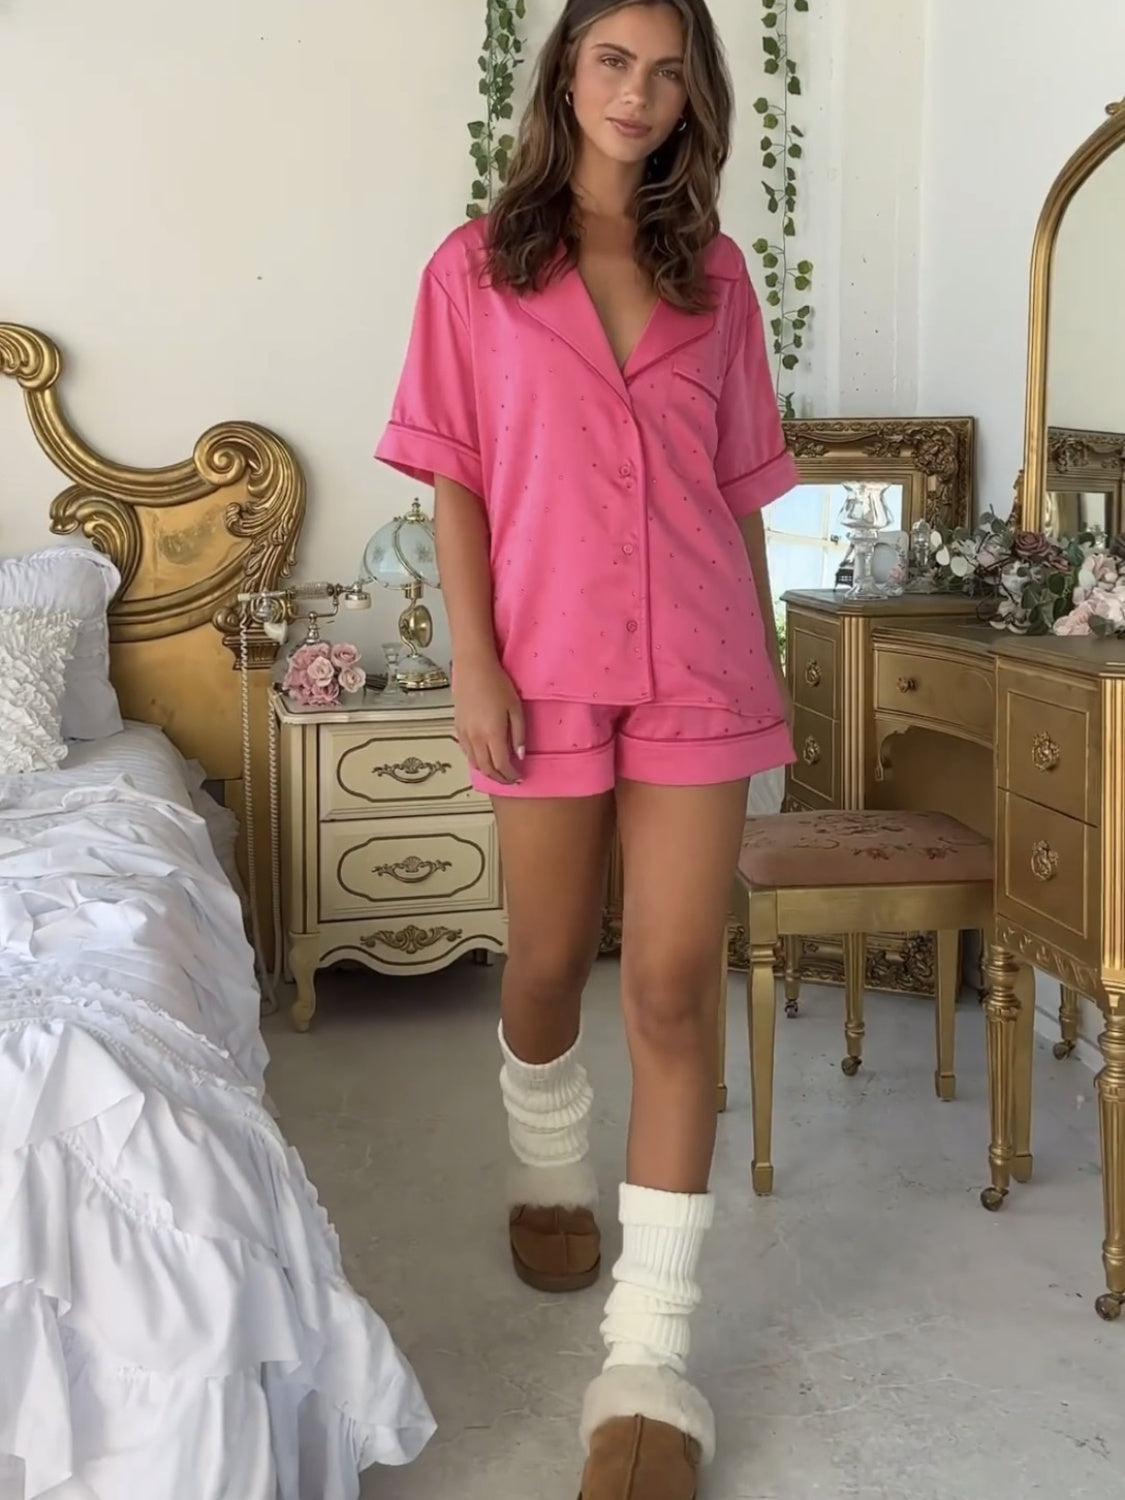 a woman in a pink shirt and shorts standing in a bedroom